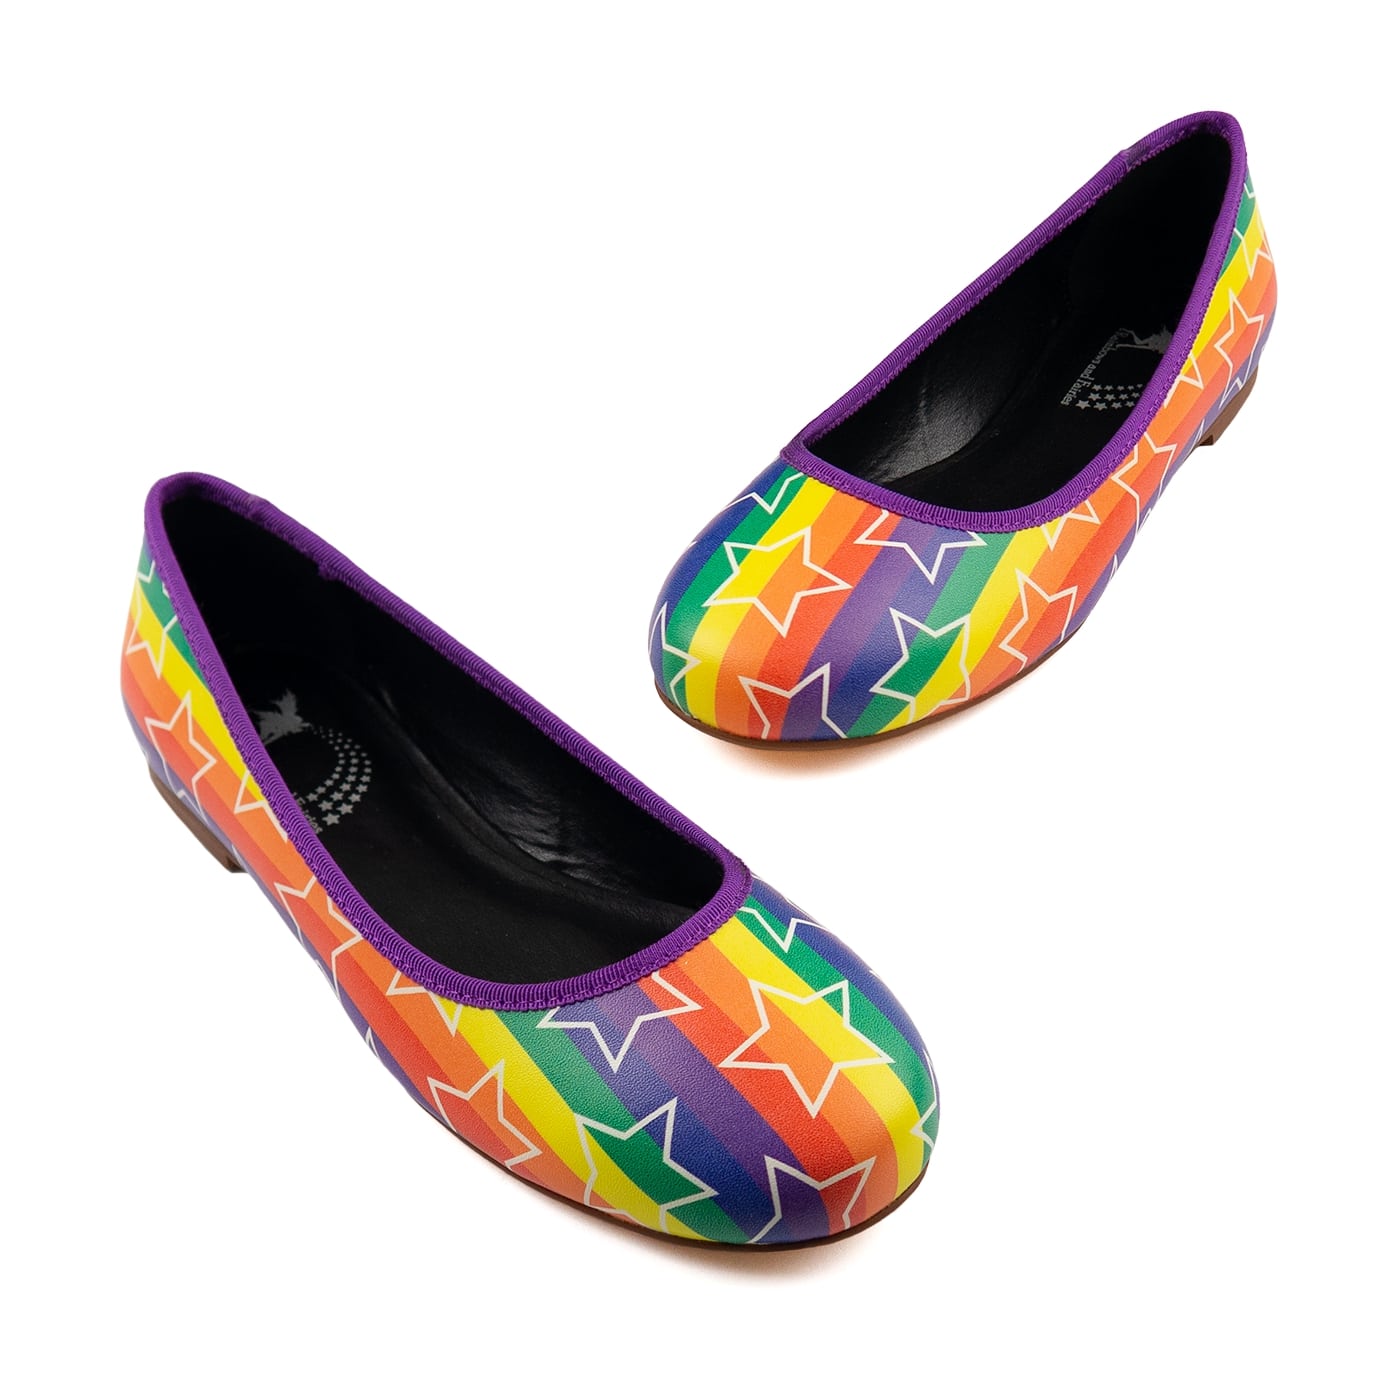 Starburst Ballet Flats by RainbowsAndFairies.com.au (Rainbow Brite Inspired - Stars - Mismatched Shoes - Pride - Rainbow Stripes - Slip On Shoes) - SKU: FW_BALET_STARB_ORG - Pic-01